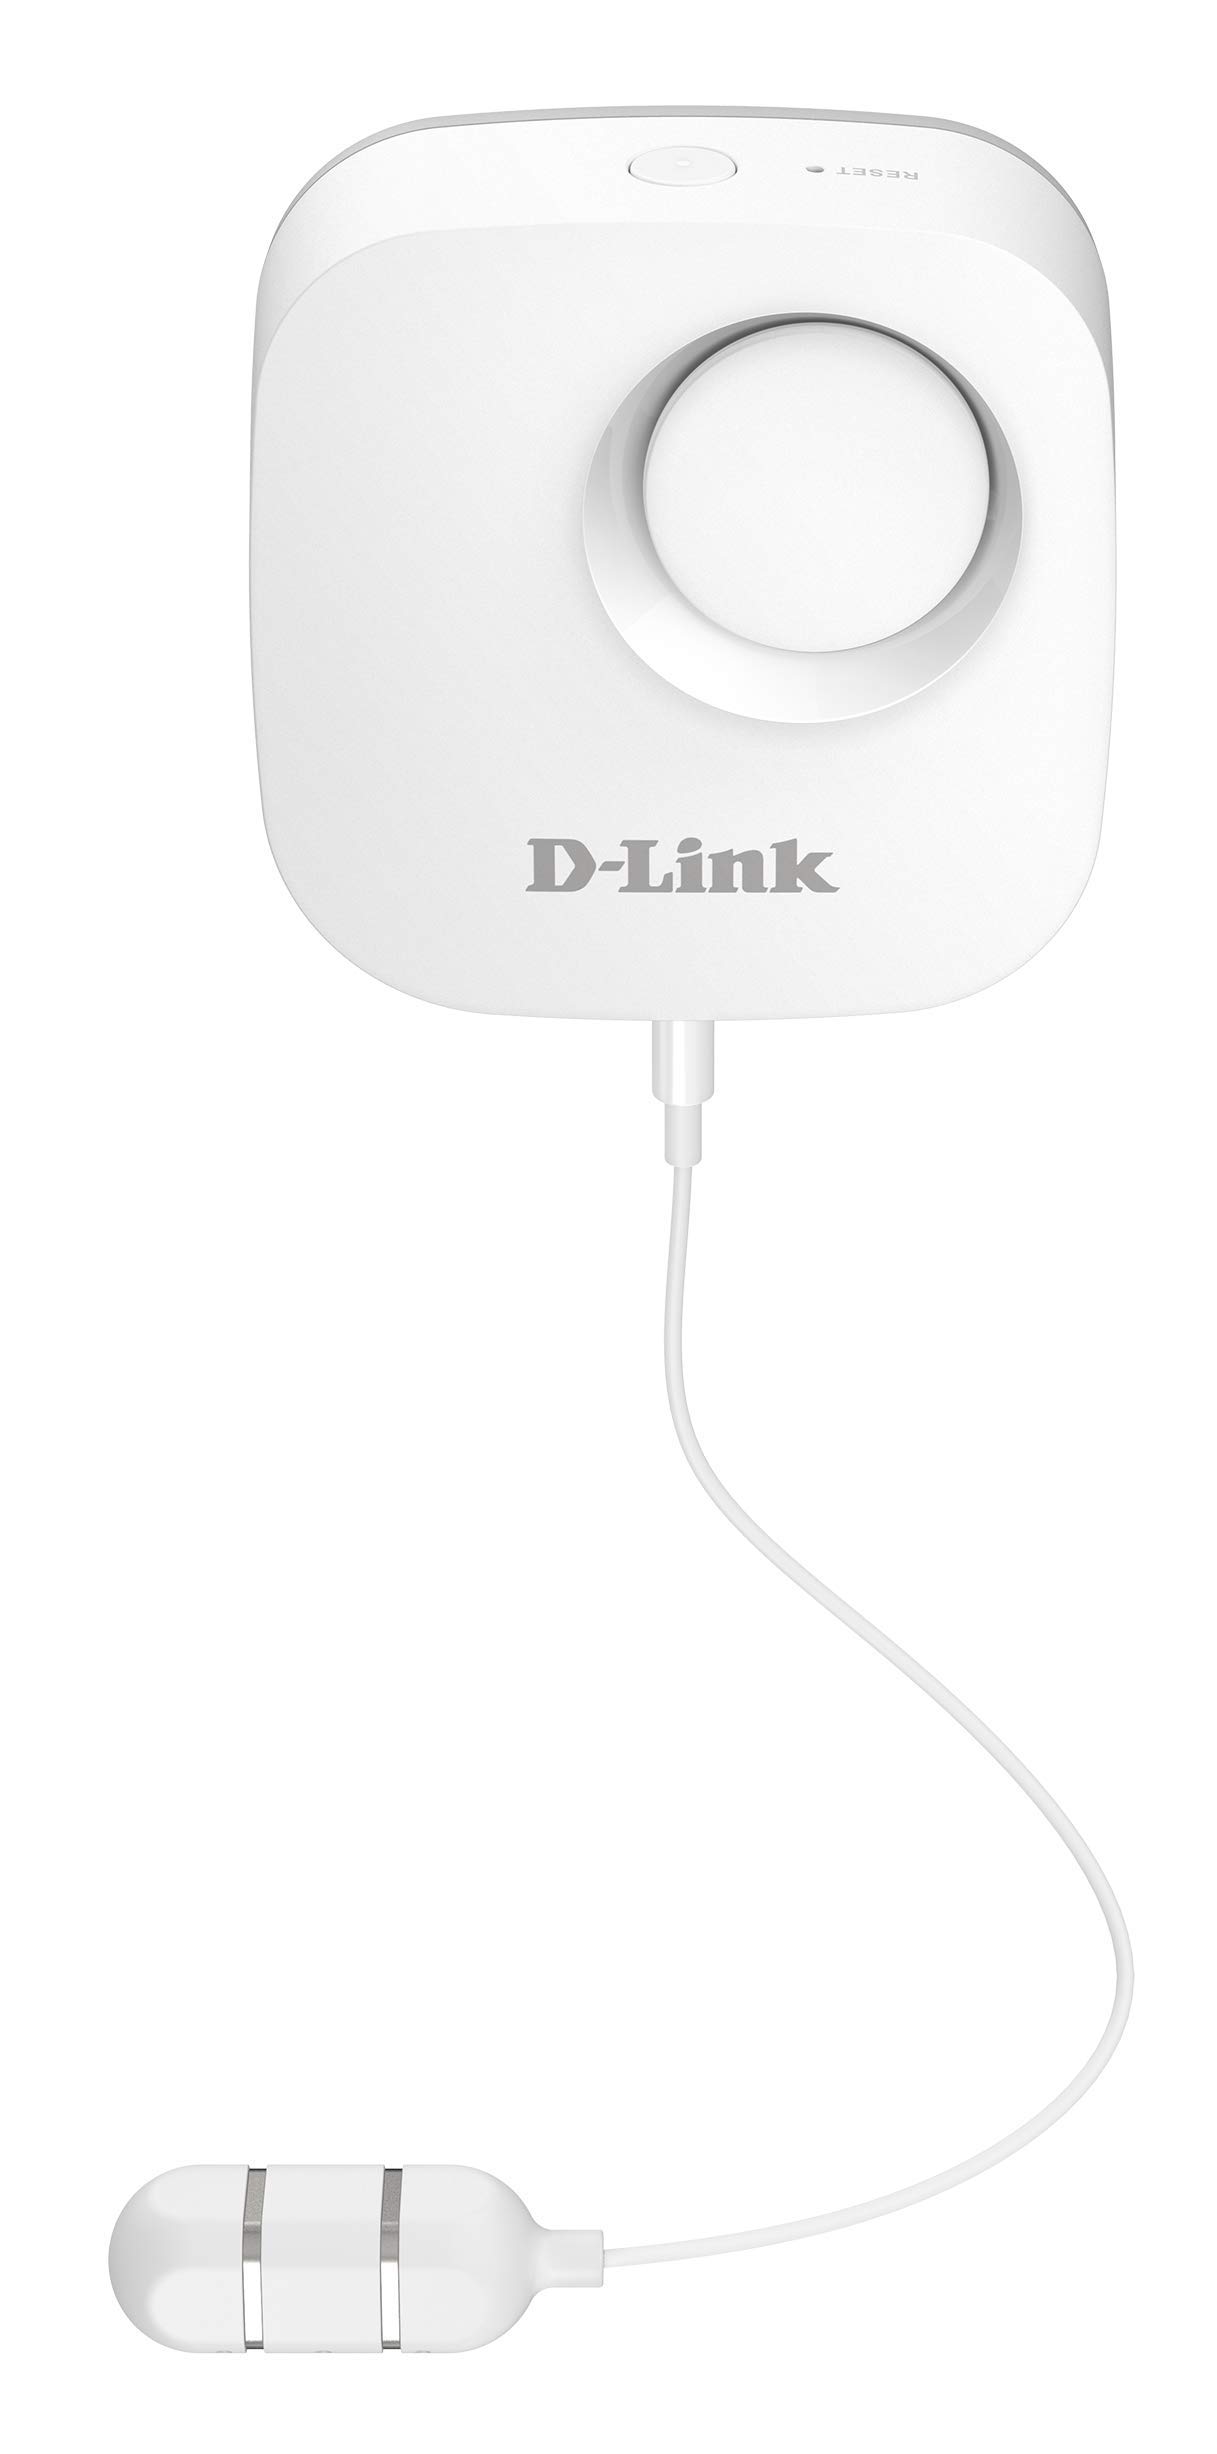 D-Link Wi-Fi Water Leak Sensor and Alarm, App Notifications, Battery Powered, No Hub Required (DCH-S161-US)